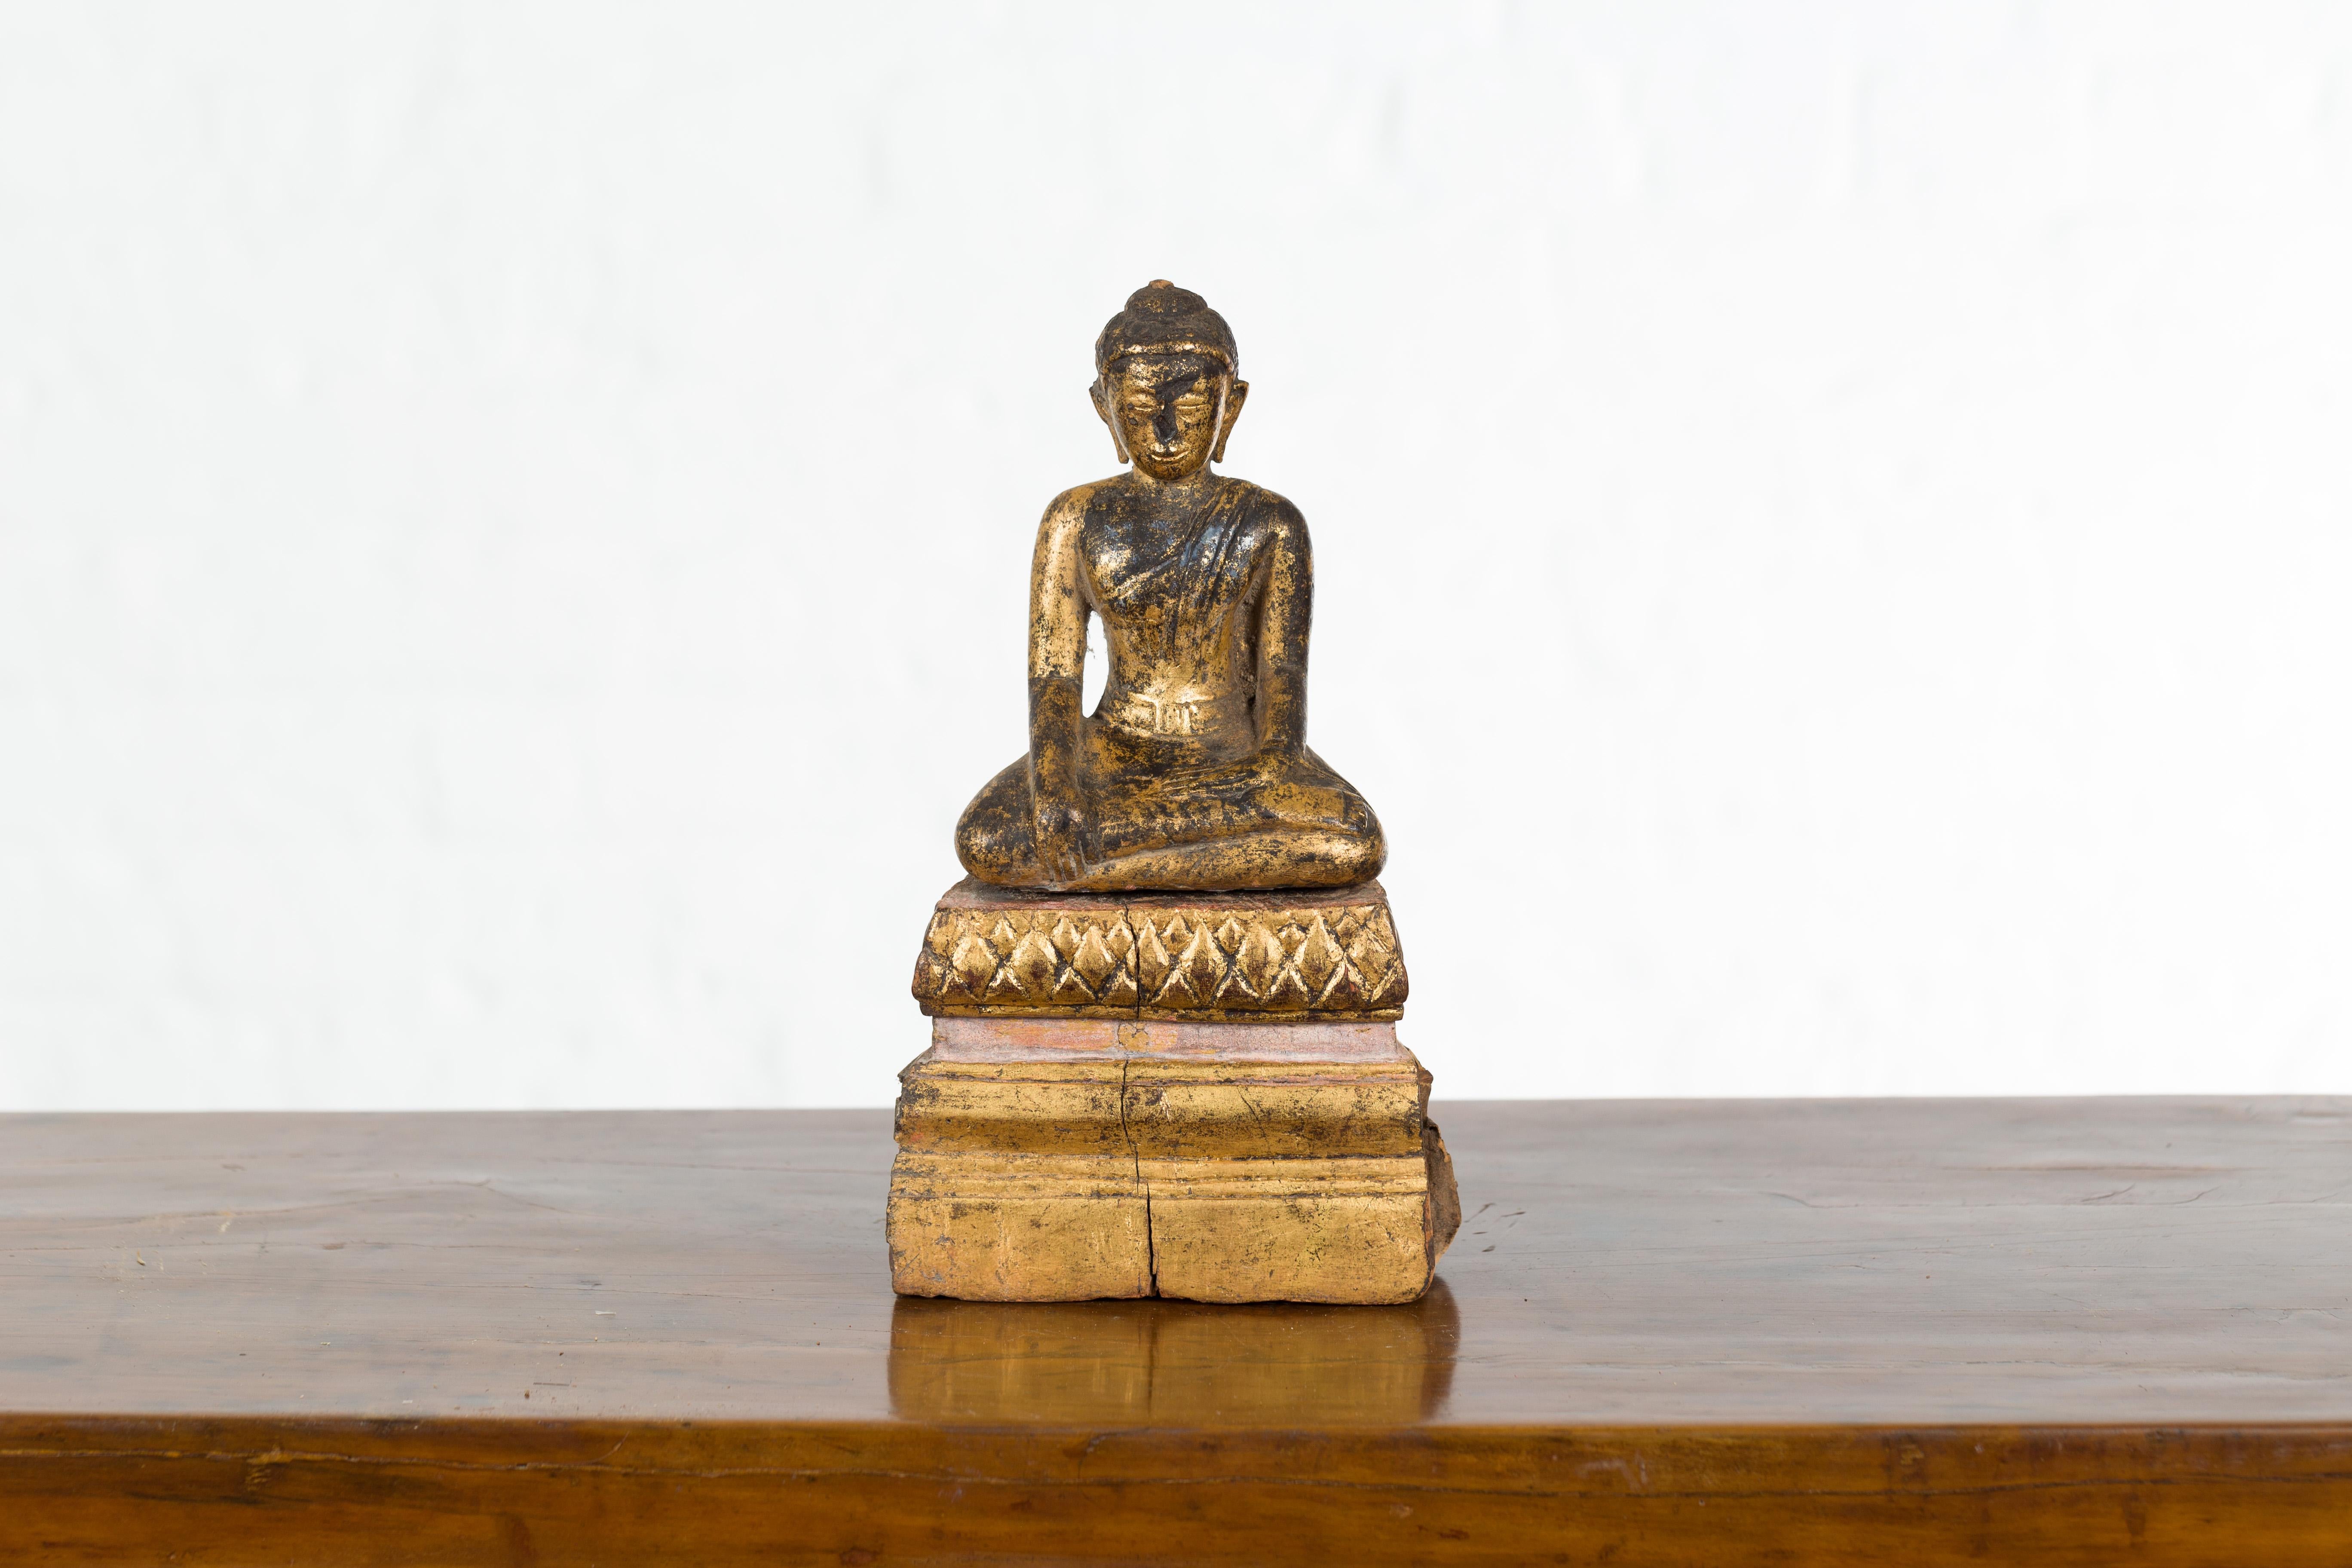 A petite antique Thai giltwood Buddha sculpture from the Ayutthaya period, with the Bhumisparsha Mudra, Calling the Earth to Witness. Created in Thailand during the Ayutthaya period (1350–1767), this small giltwood sculpture depicts the Buddha